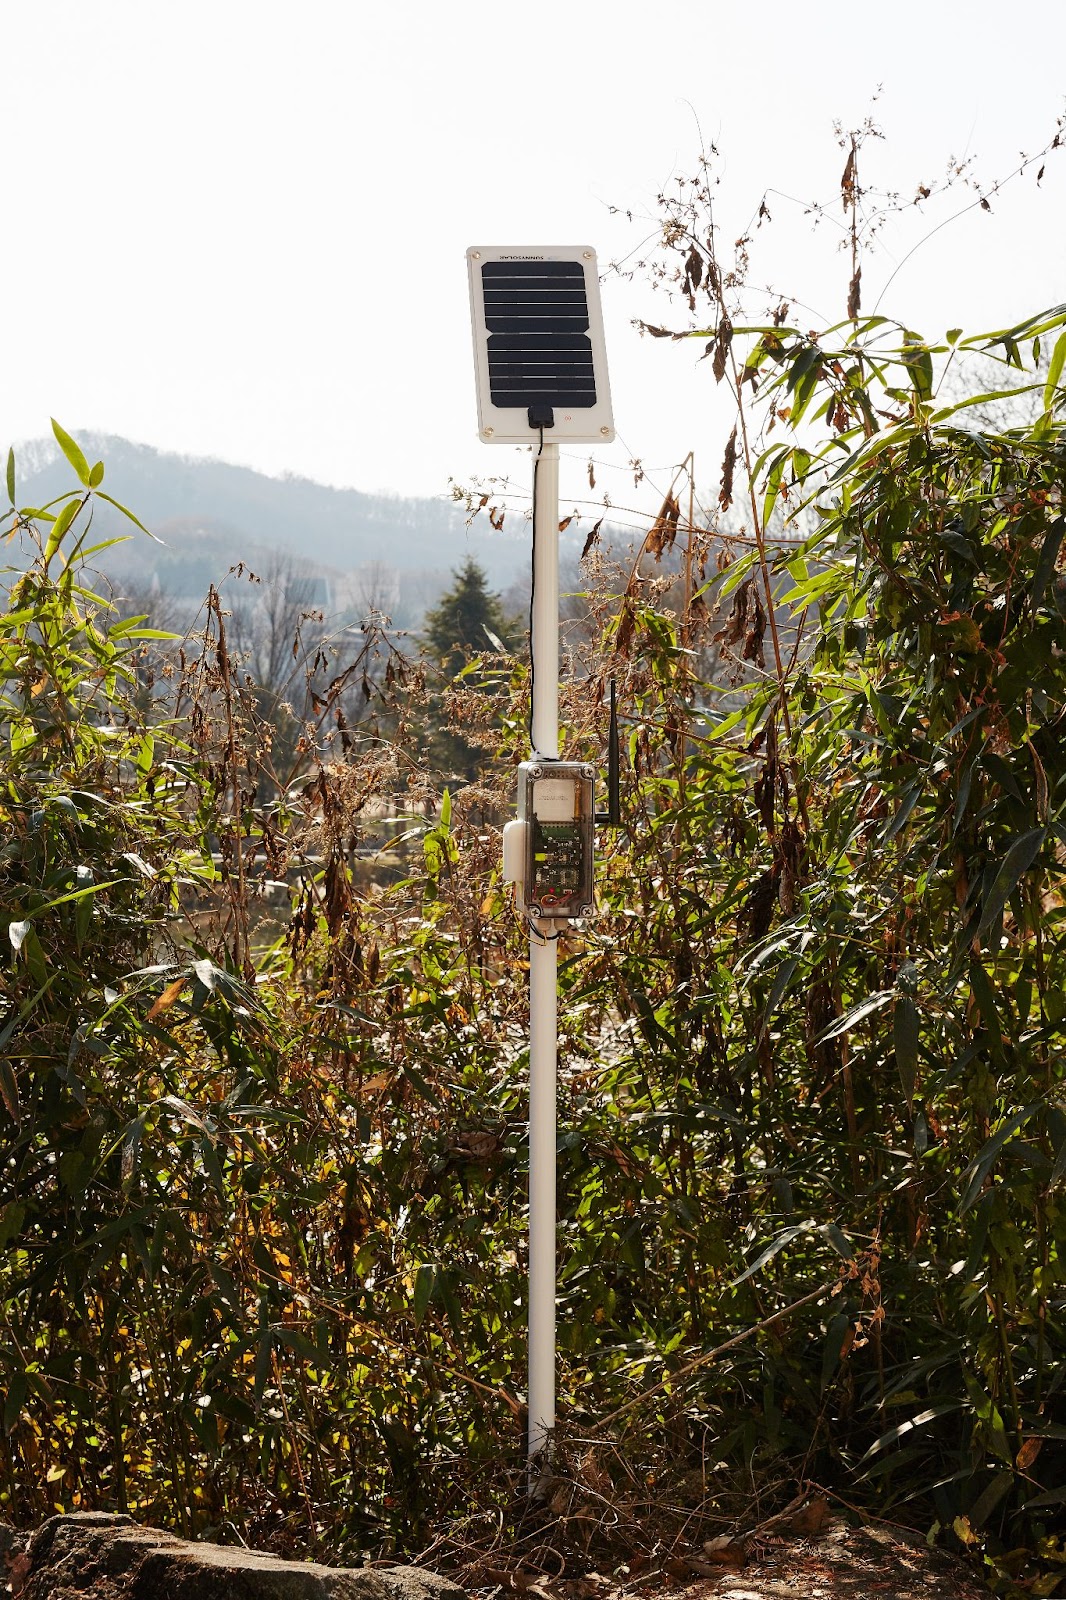 Image description: solar powered computer with environmental sensors outside of the gallery